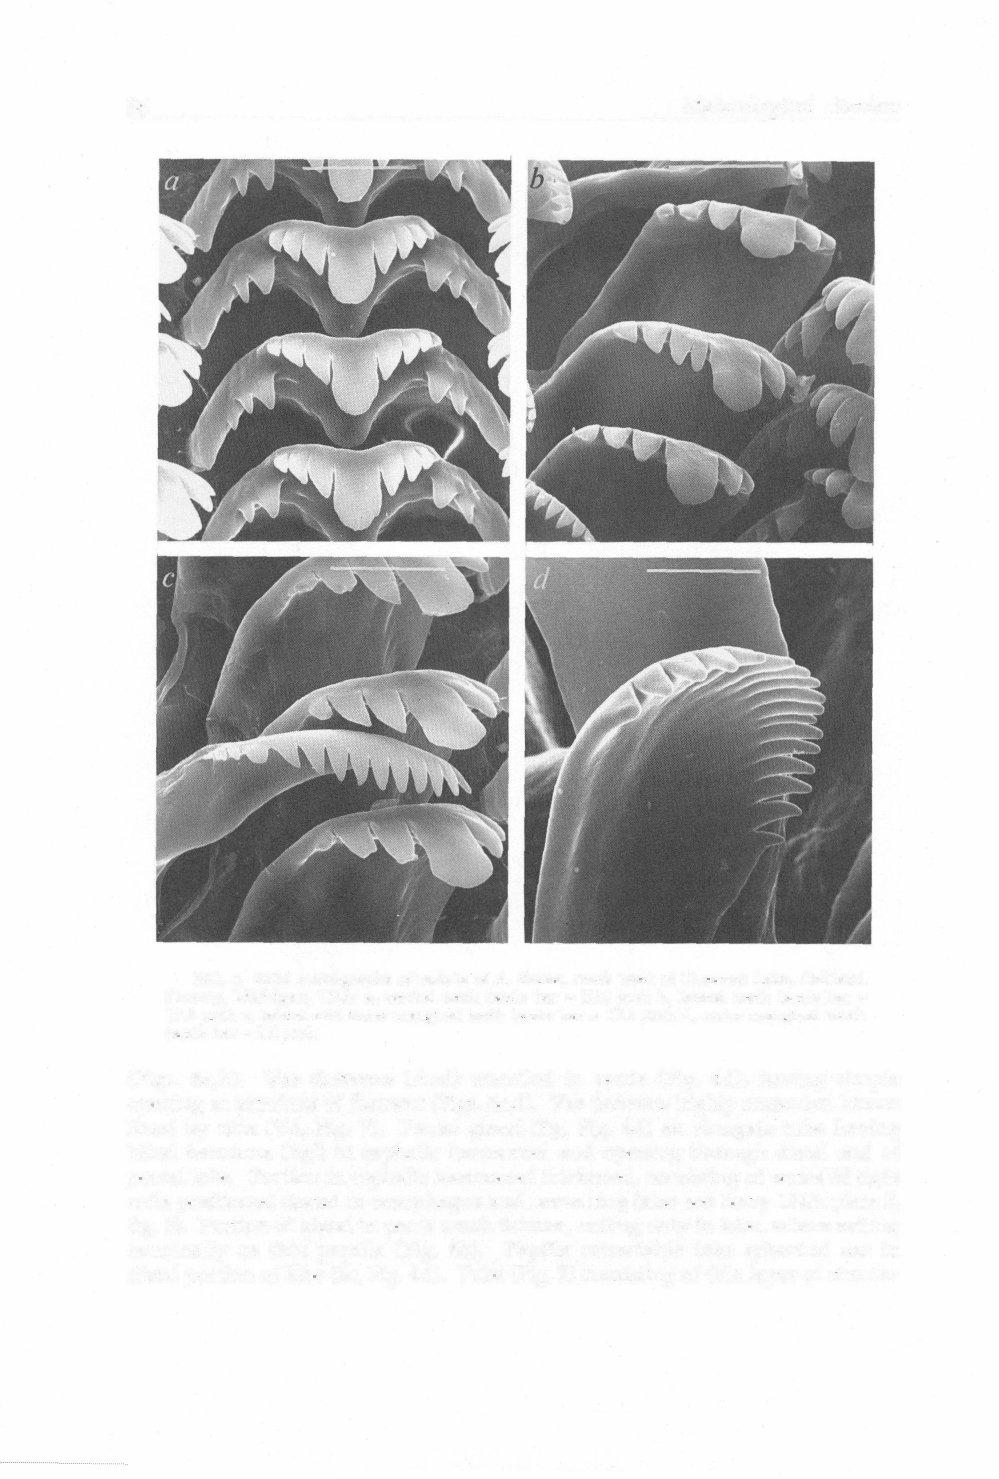 86 Malacological Review FIG. 5. SEM micrographs oi radula of A. limosa, creek west of Crescent Lake, Oakland County, Michigan, USA: a, central teeth (scale bar = 20.